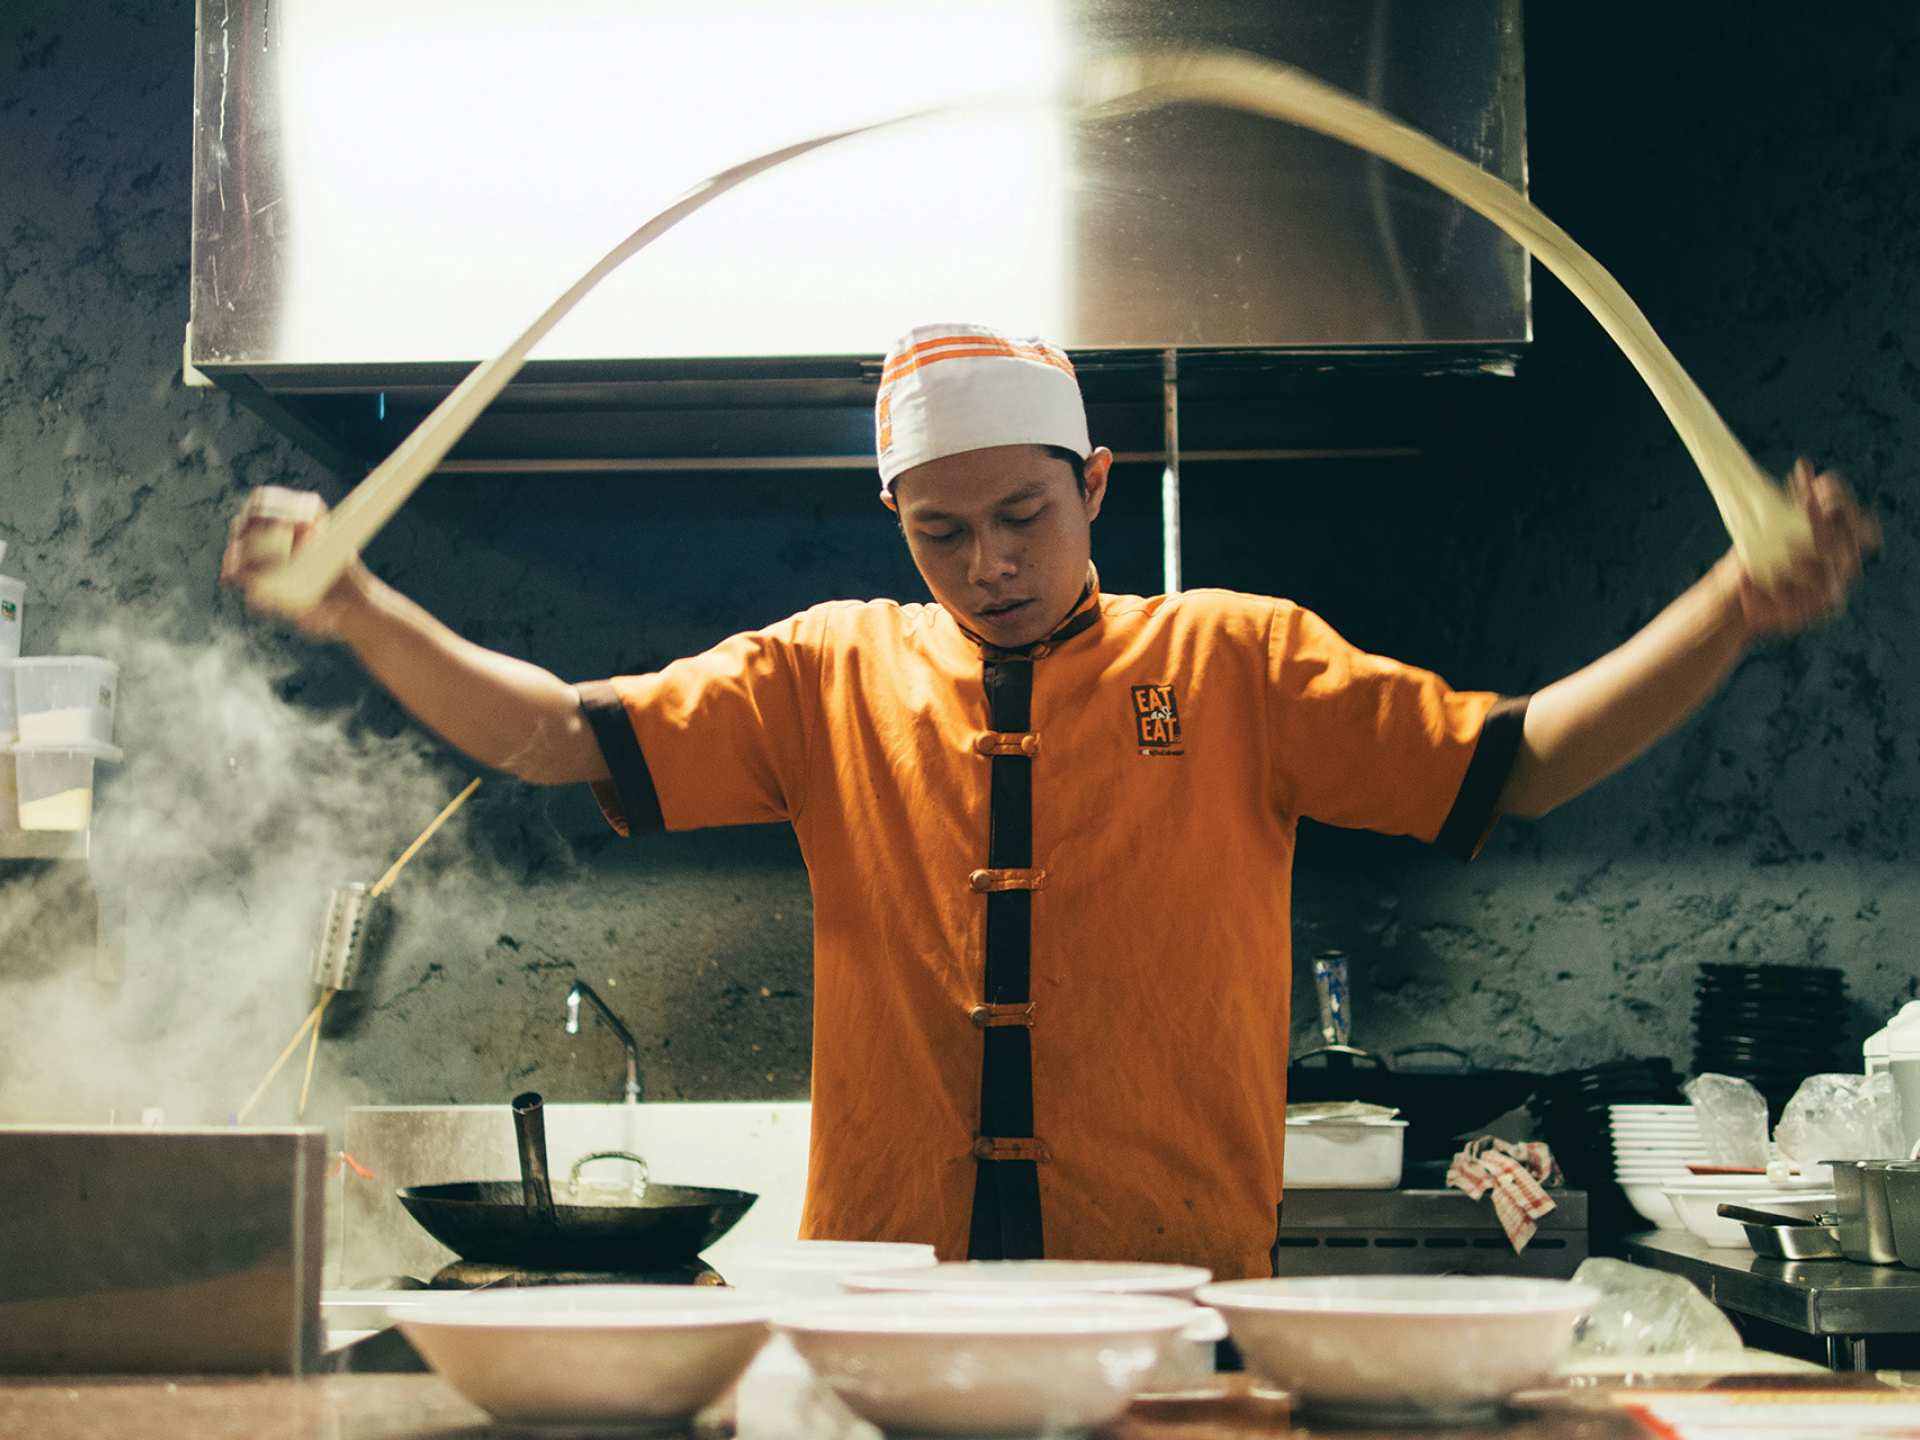 Mississauga | A man swinging a long strand of dough over his head